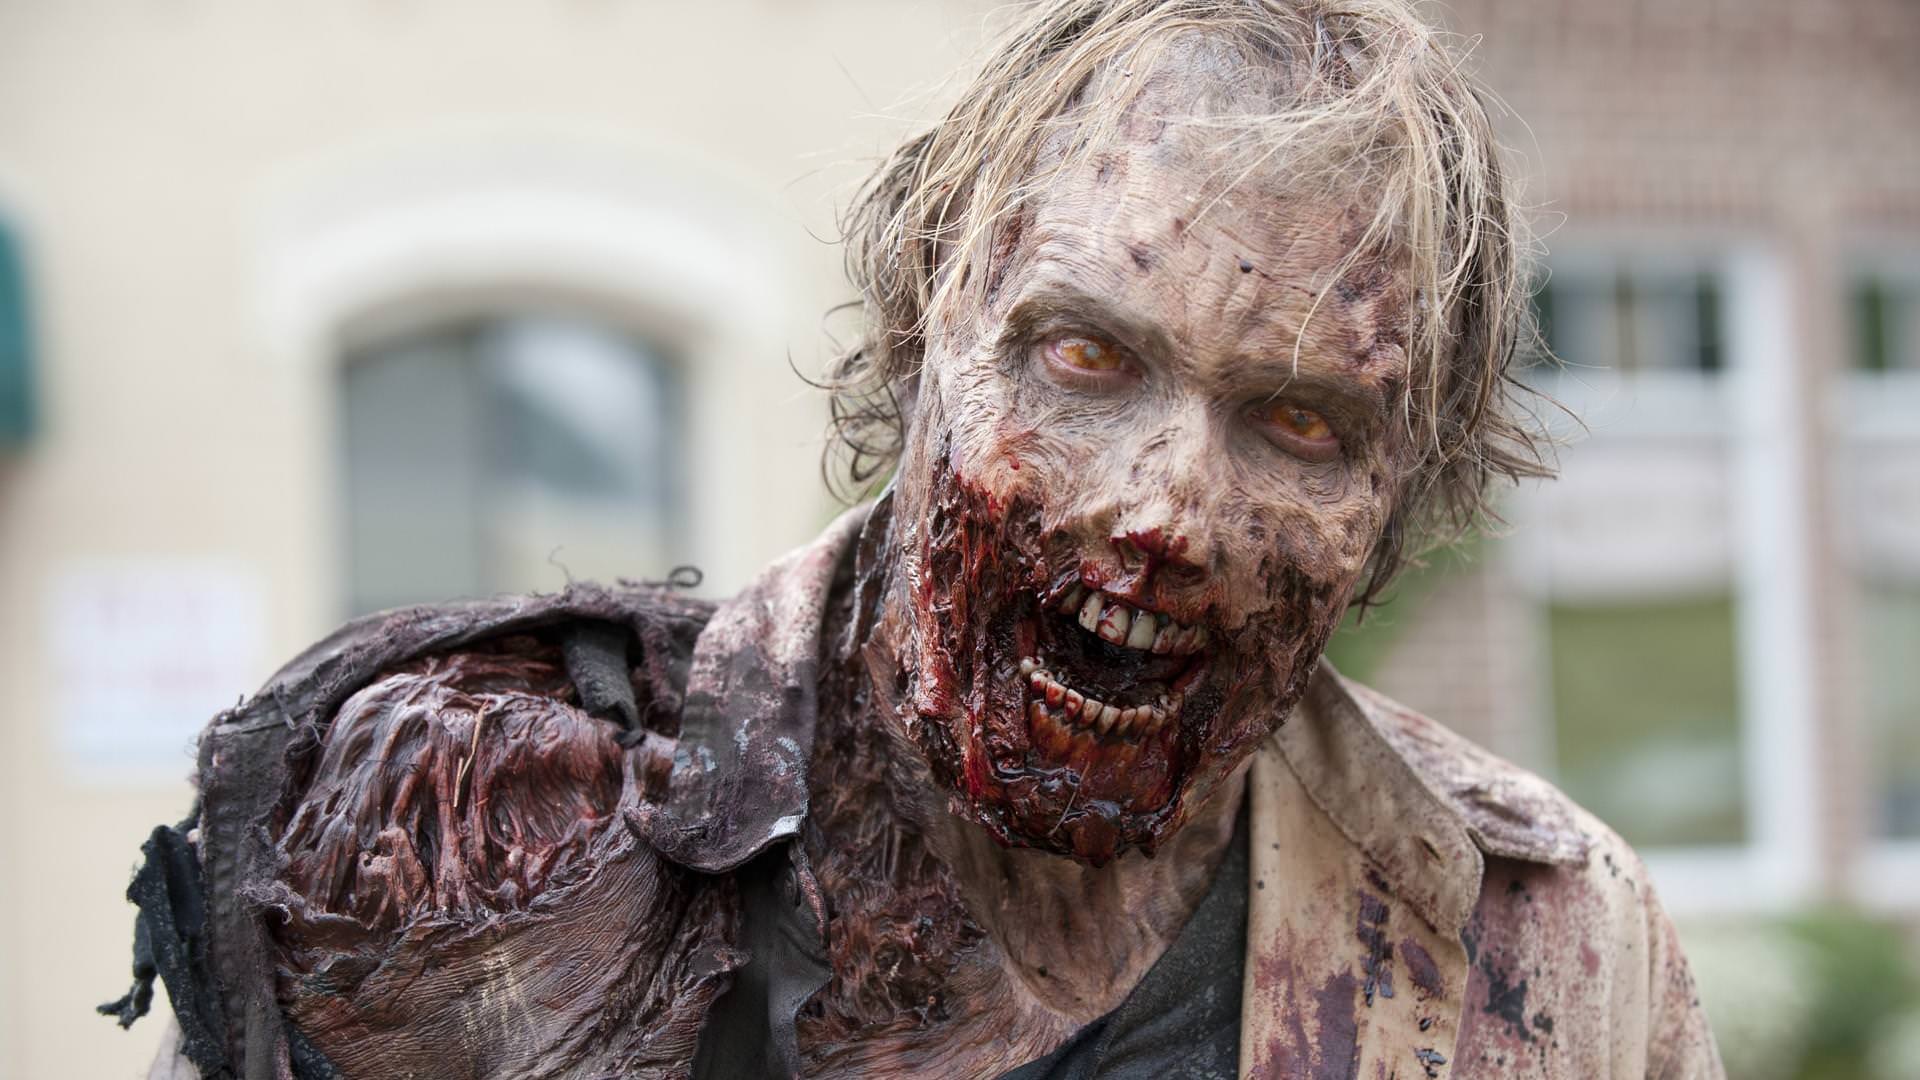 Man Tells Cops He Killed His Friend for “Turning into a Zombie” After watching Too Much The Walking Dead